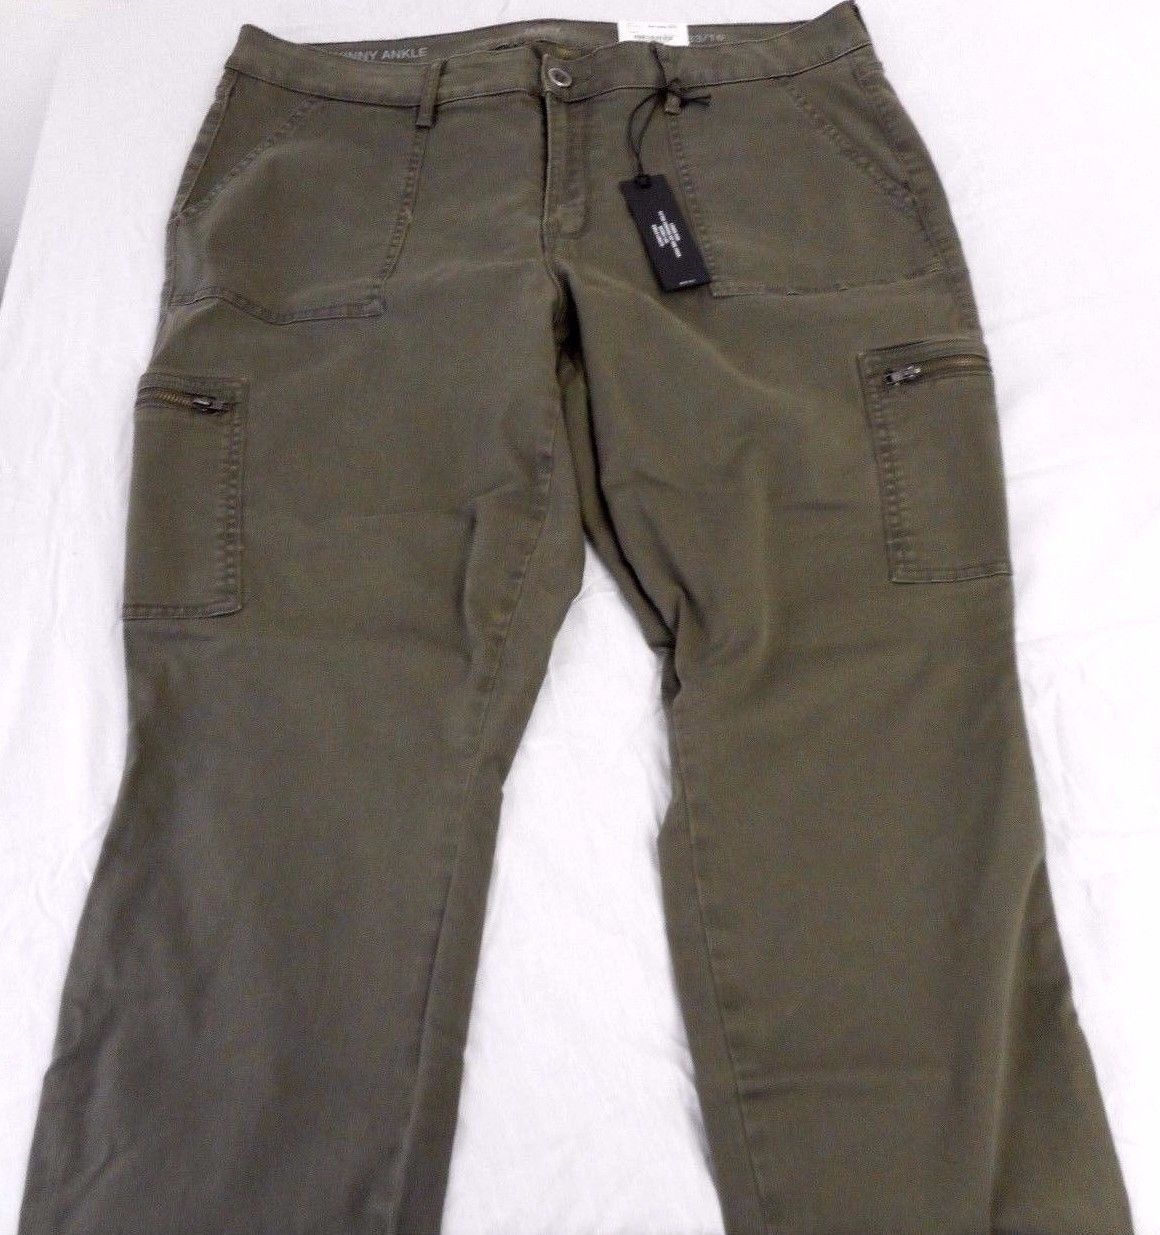 Women's Juniors a.n.a. Skinny Ankle Pants Oregano Size 33/16 New